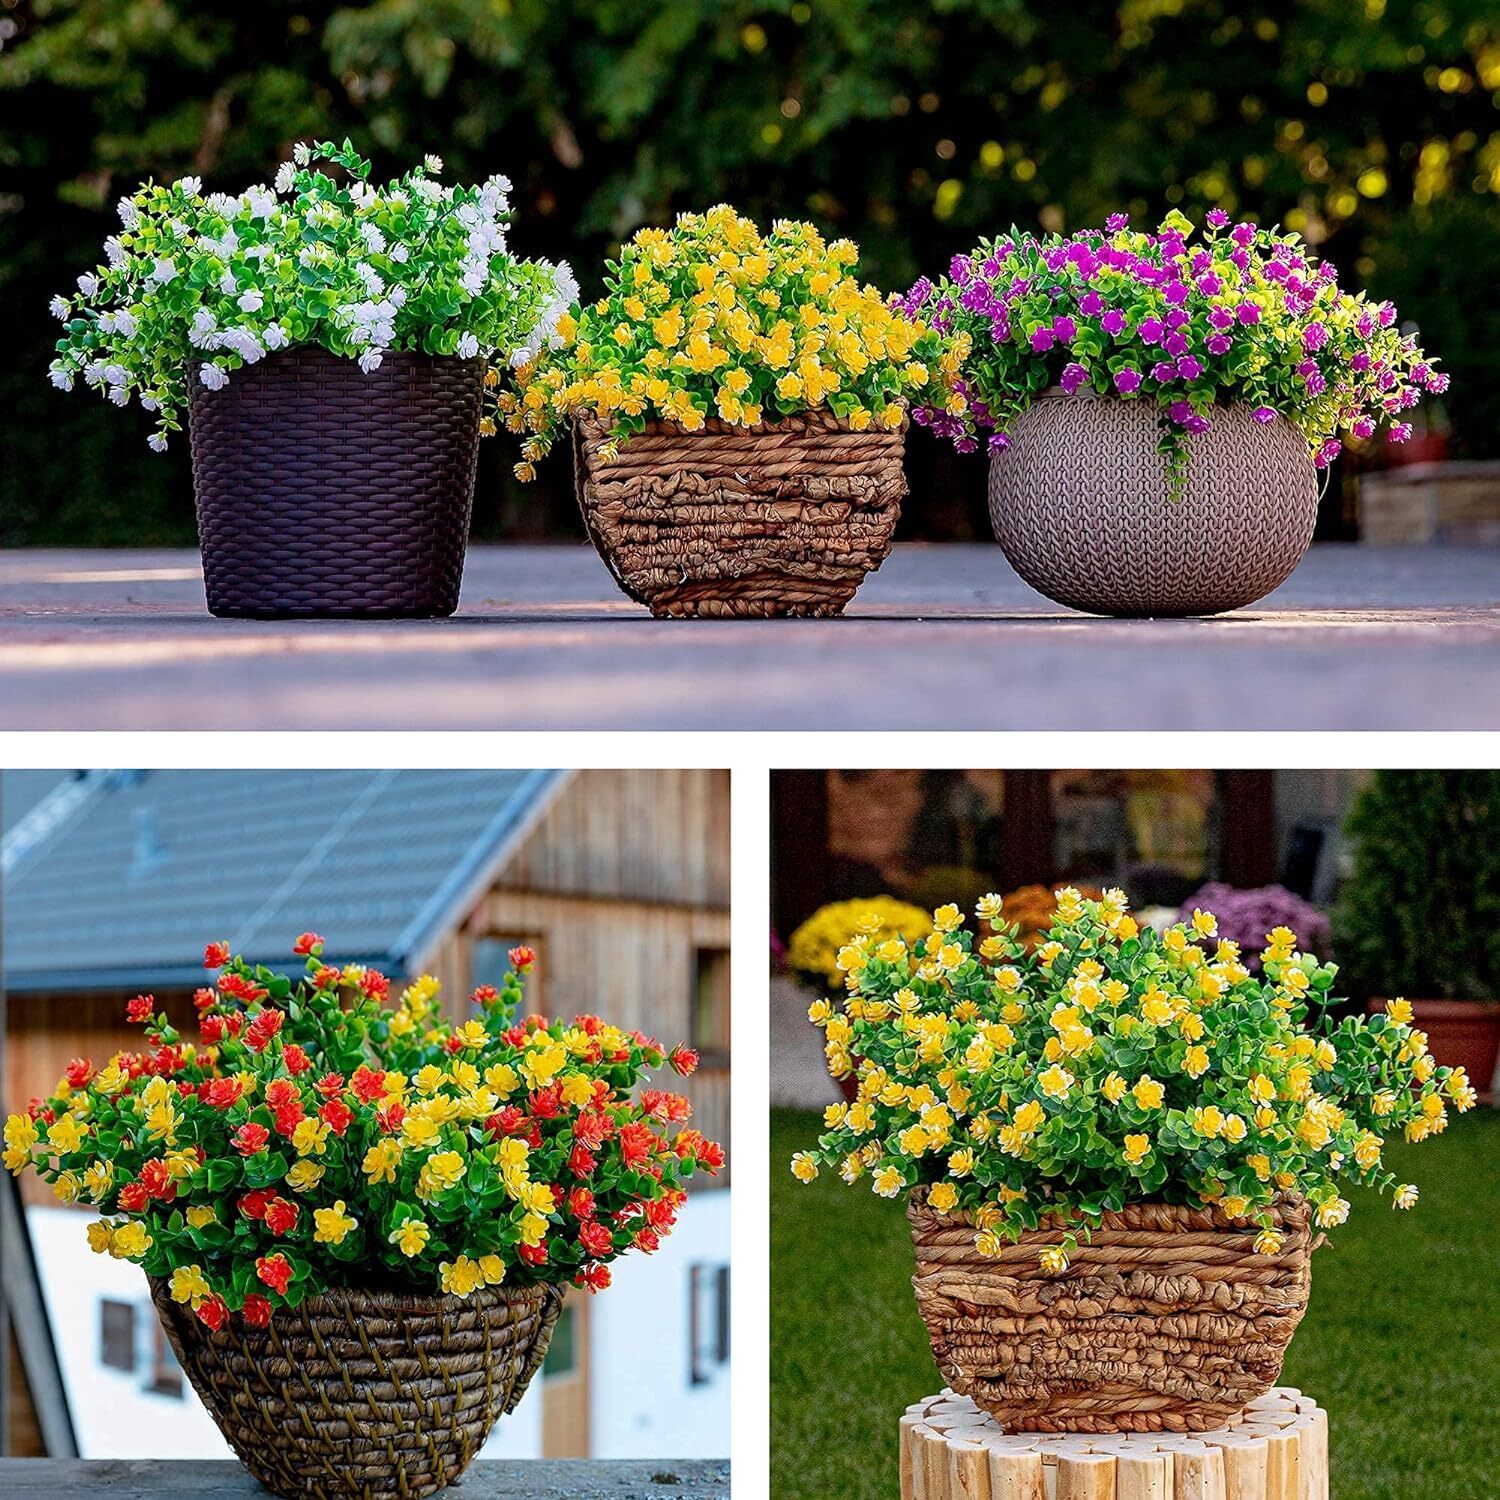 ✨HOT SALE✨Outdoor Artificial Pretty Flowers💐